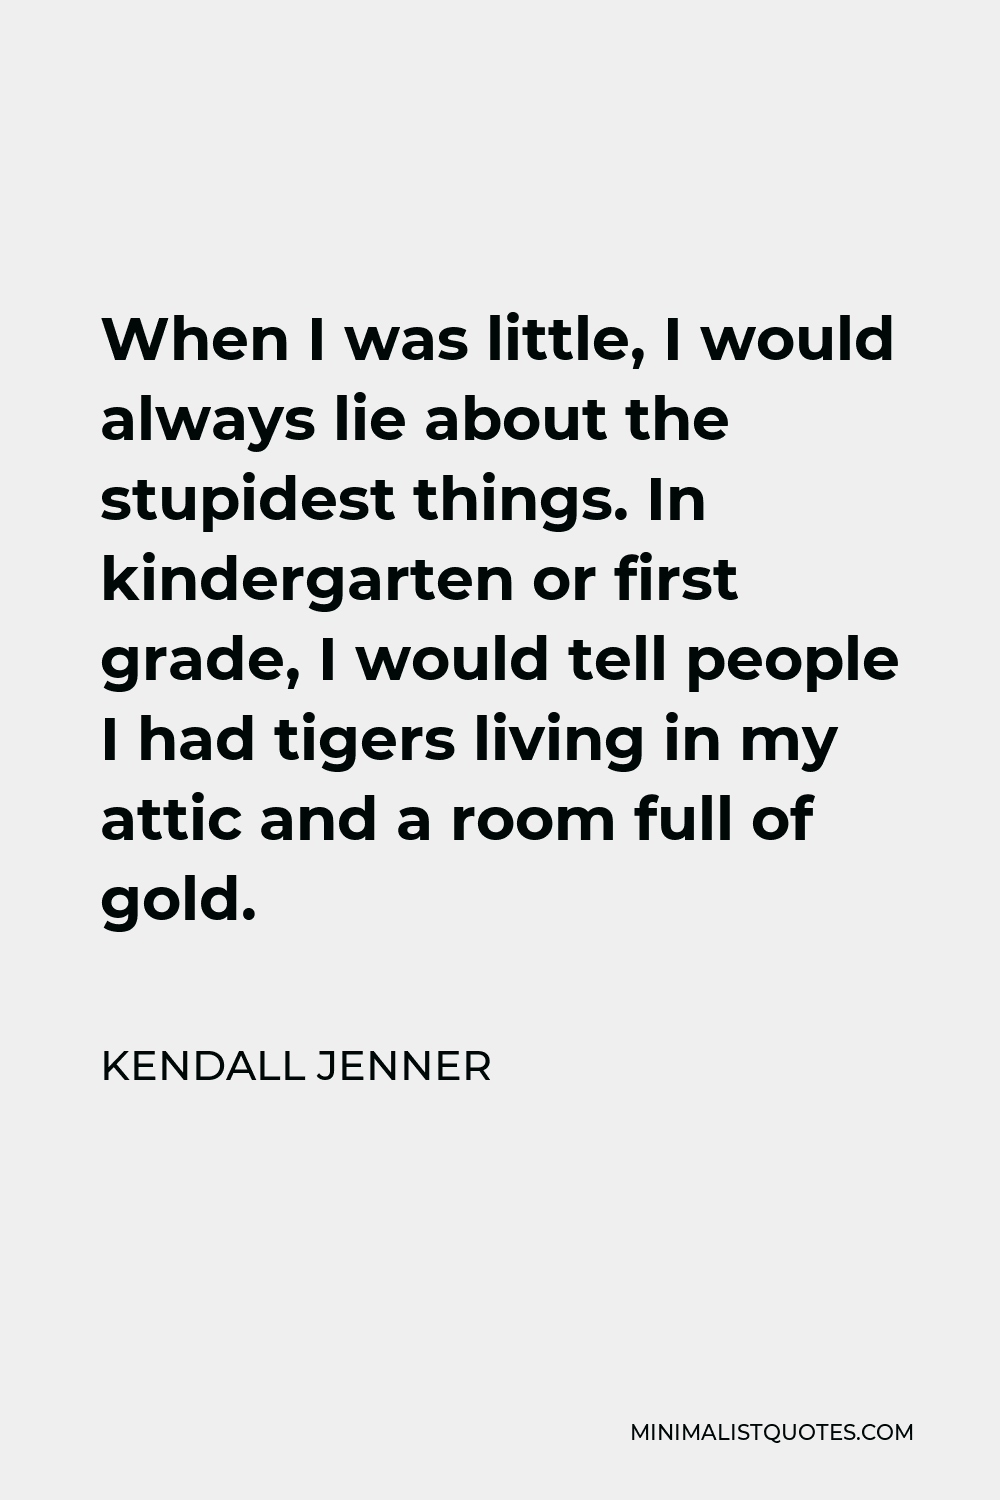 Kendall Jenner Quote - When I was little, I would always lie about the stupidest things. In kindergarten or first grade, I would tell people I had tigers living in my attic and a room full of gold.